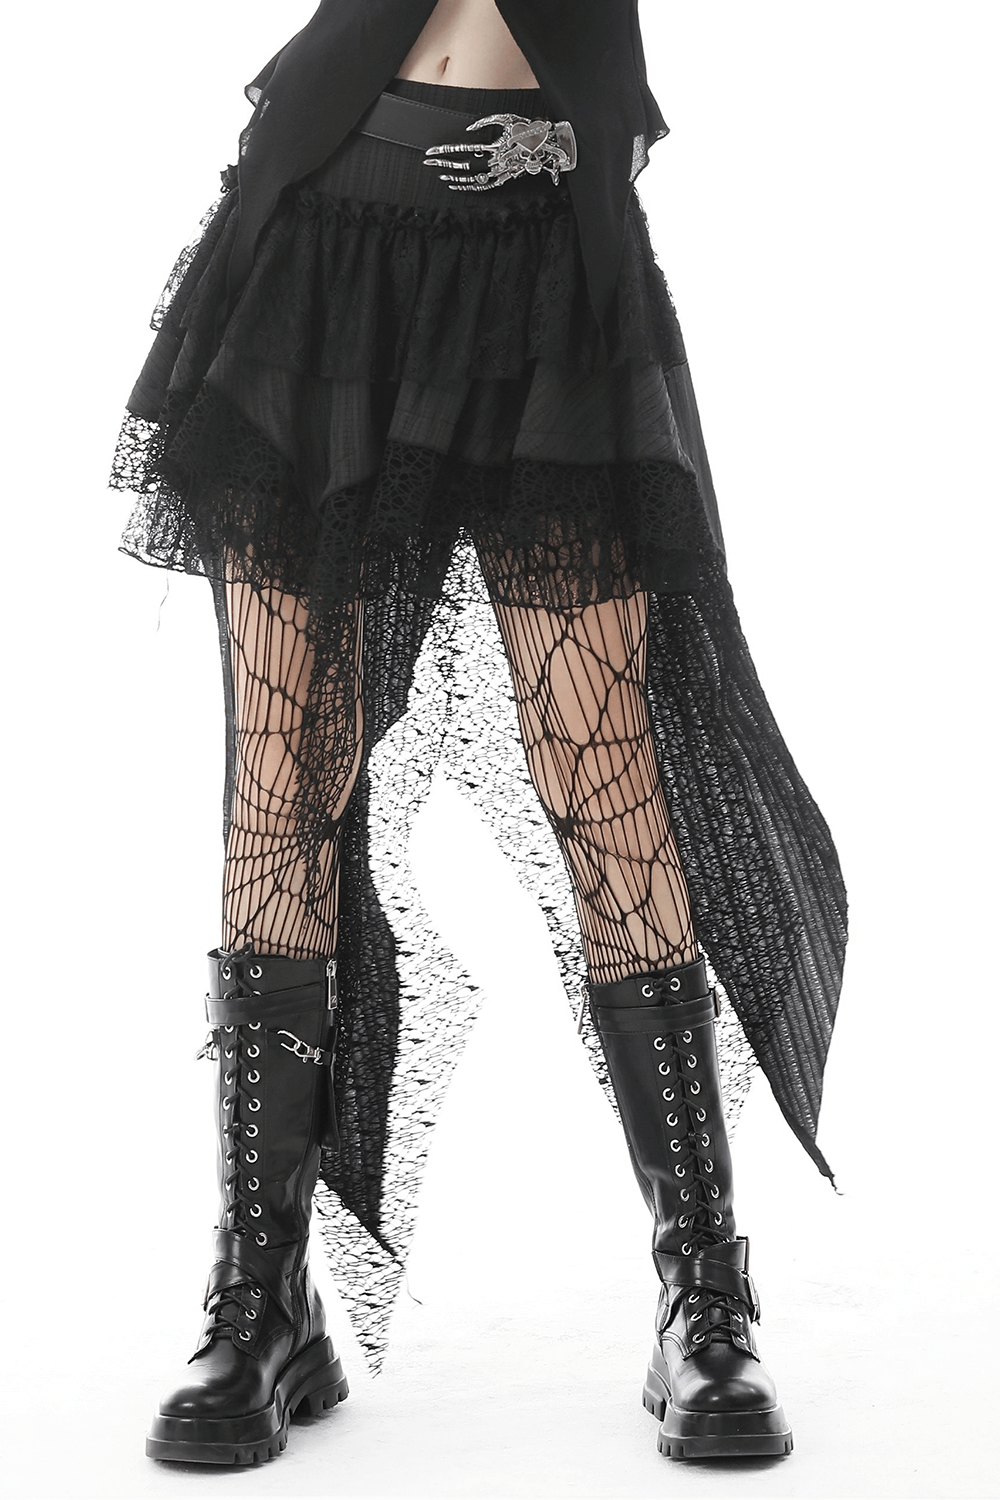 Gothic Women's Layered Lace Skirt with Fishnet Detail